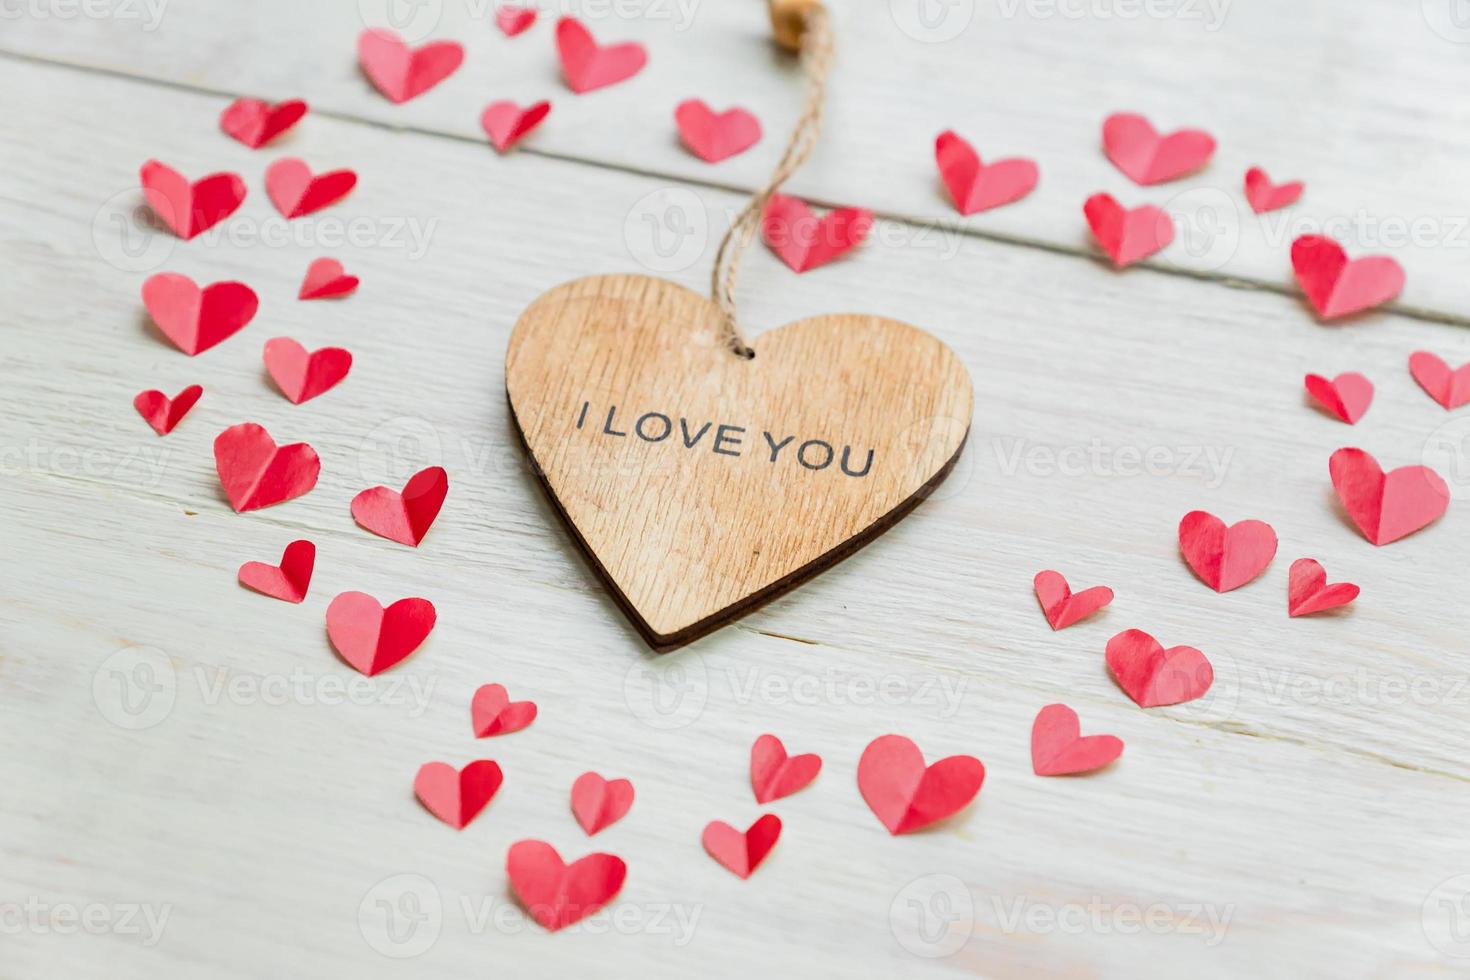 Big red heart made of cut out paper small hearts and wooden heart with I love you inscription on wooden backround. Handmade decoration for Valentine's day. photo